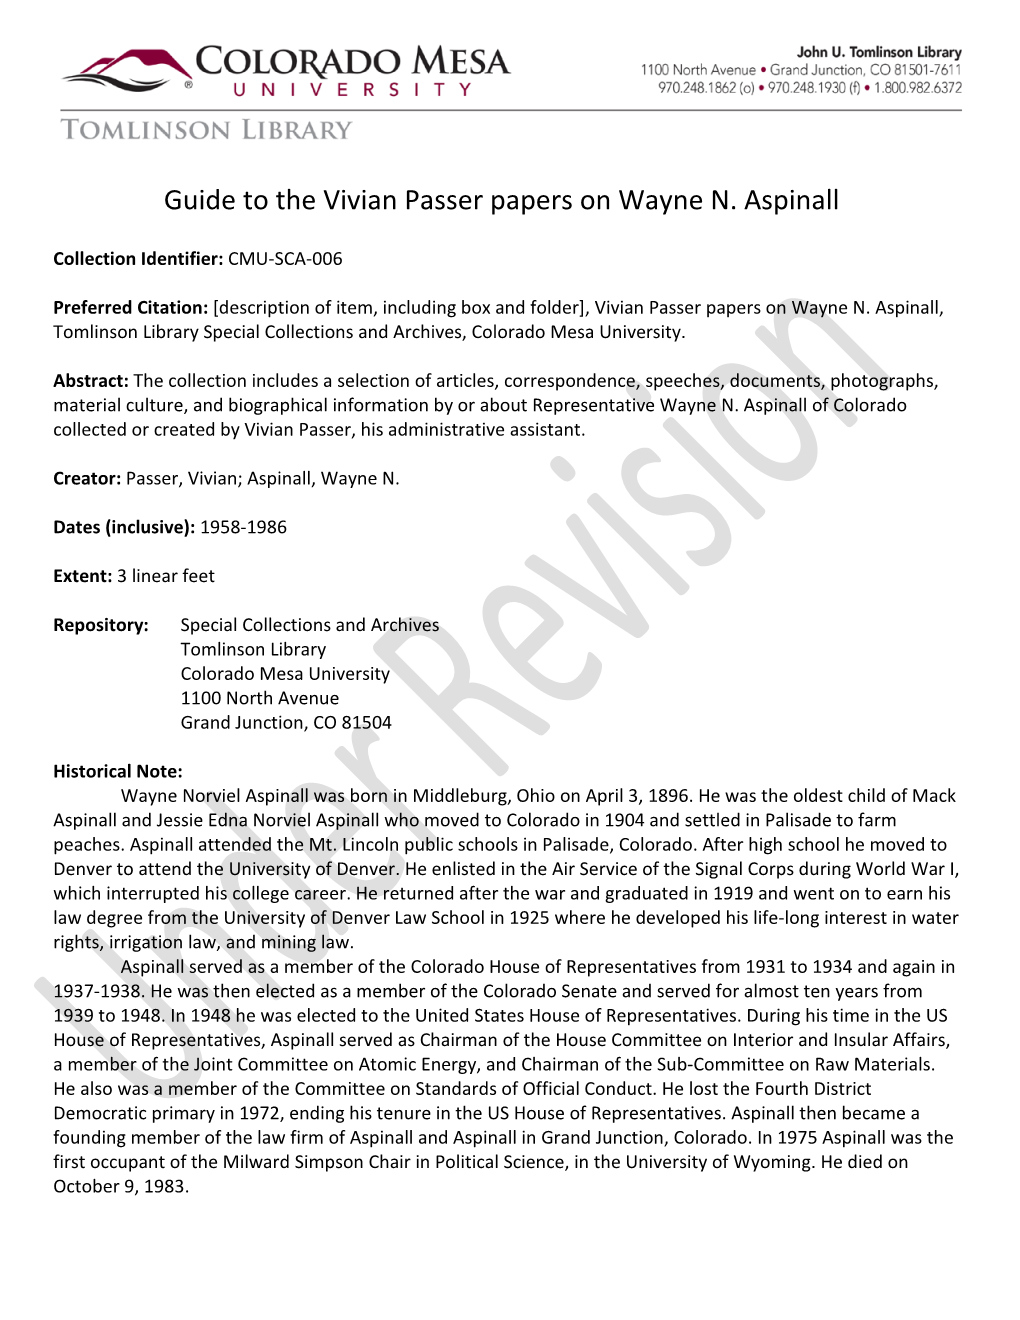 Guide to the Vivian Passer Papers on Wayne N. Aspinall